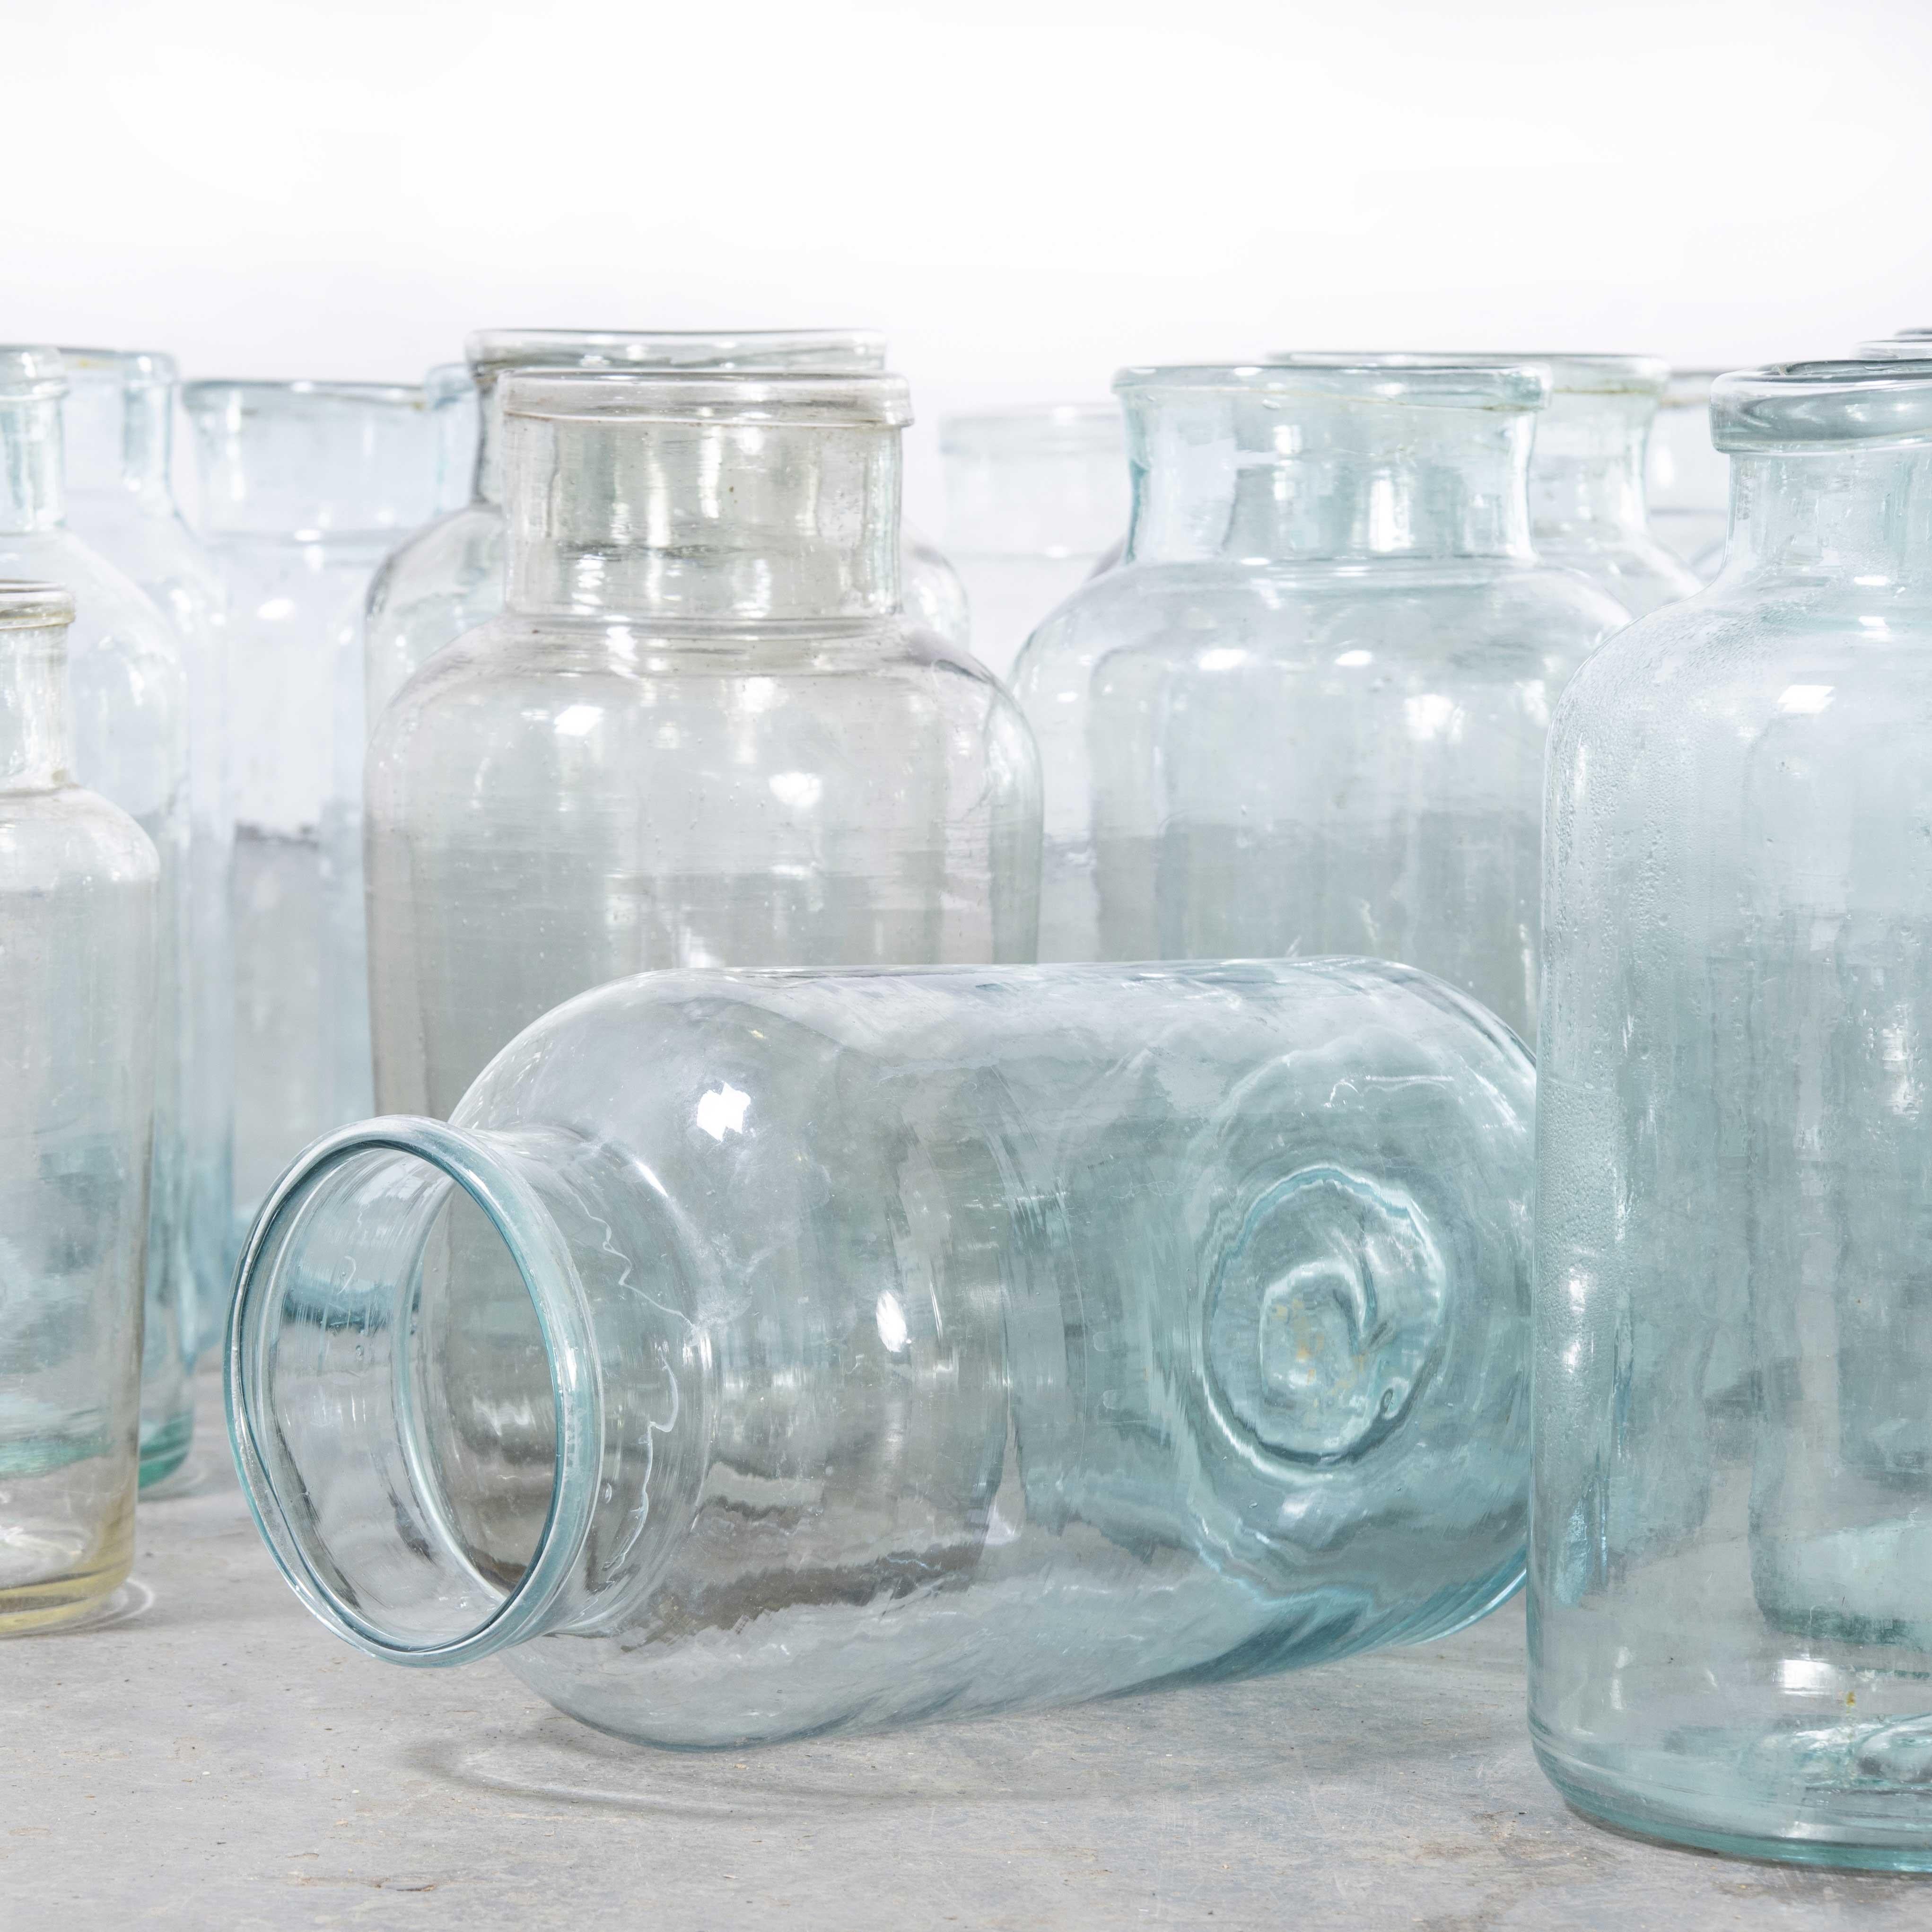 1940’s Mouthblown Hungarian storage storage jars – large
1940’s Mouthblown Hungarian storage Storage jars – large. Traditional handmade storage jars made in small workshops in Hungary these are beautiful vintage storage jars, mouthblown locally.